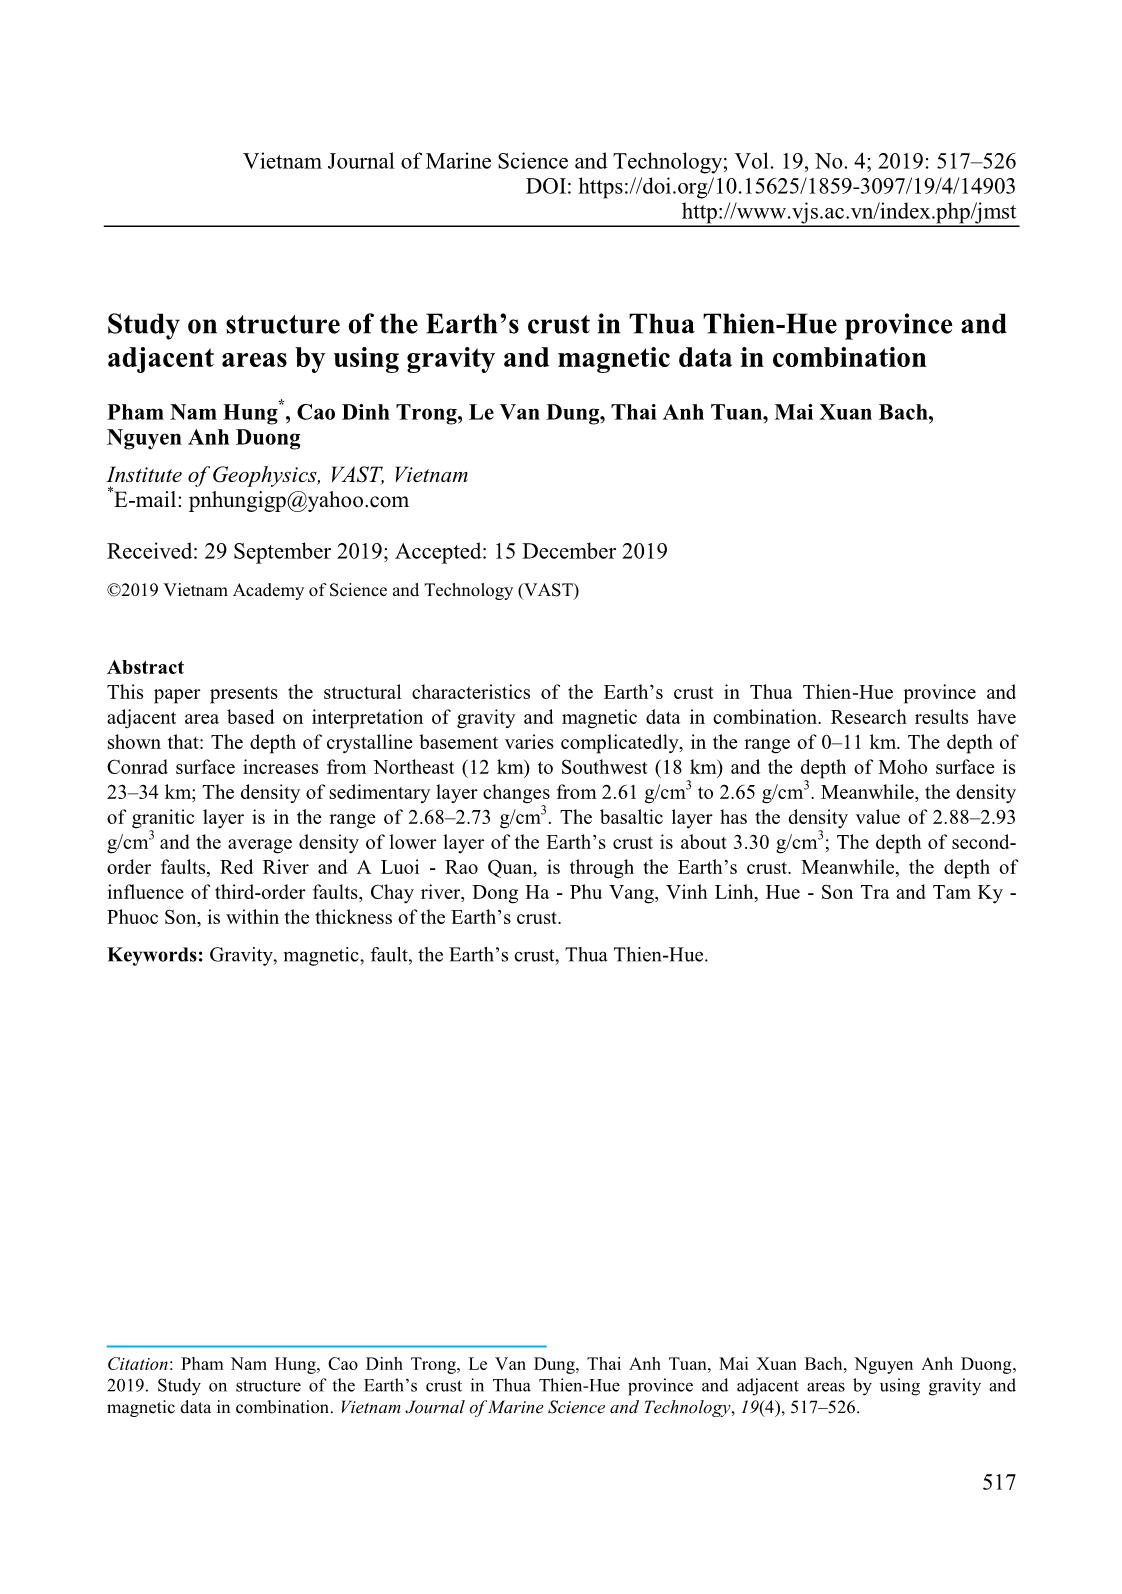 Study on structure of the Earth’s crust in Thua Thien-Hue province and adjacent areas by using gravity and magnetic data in combination trang 1